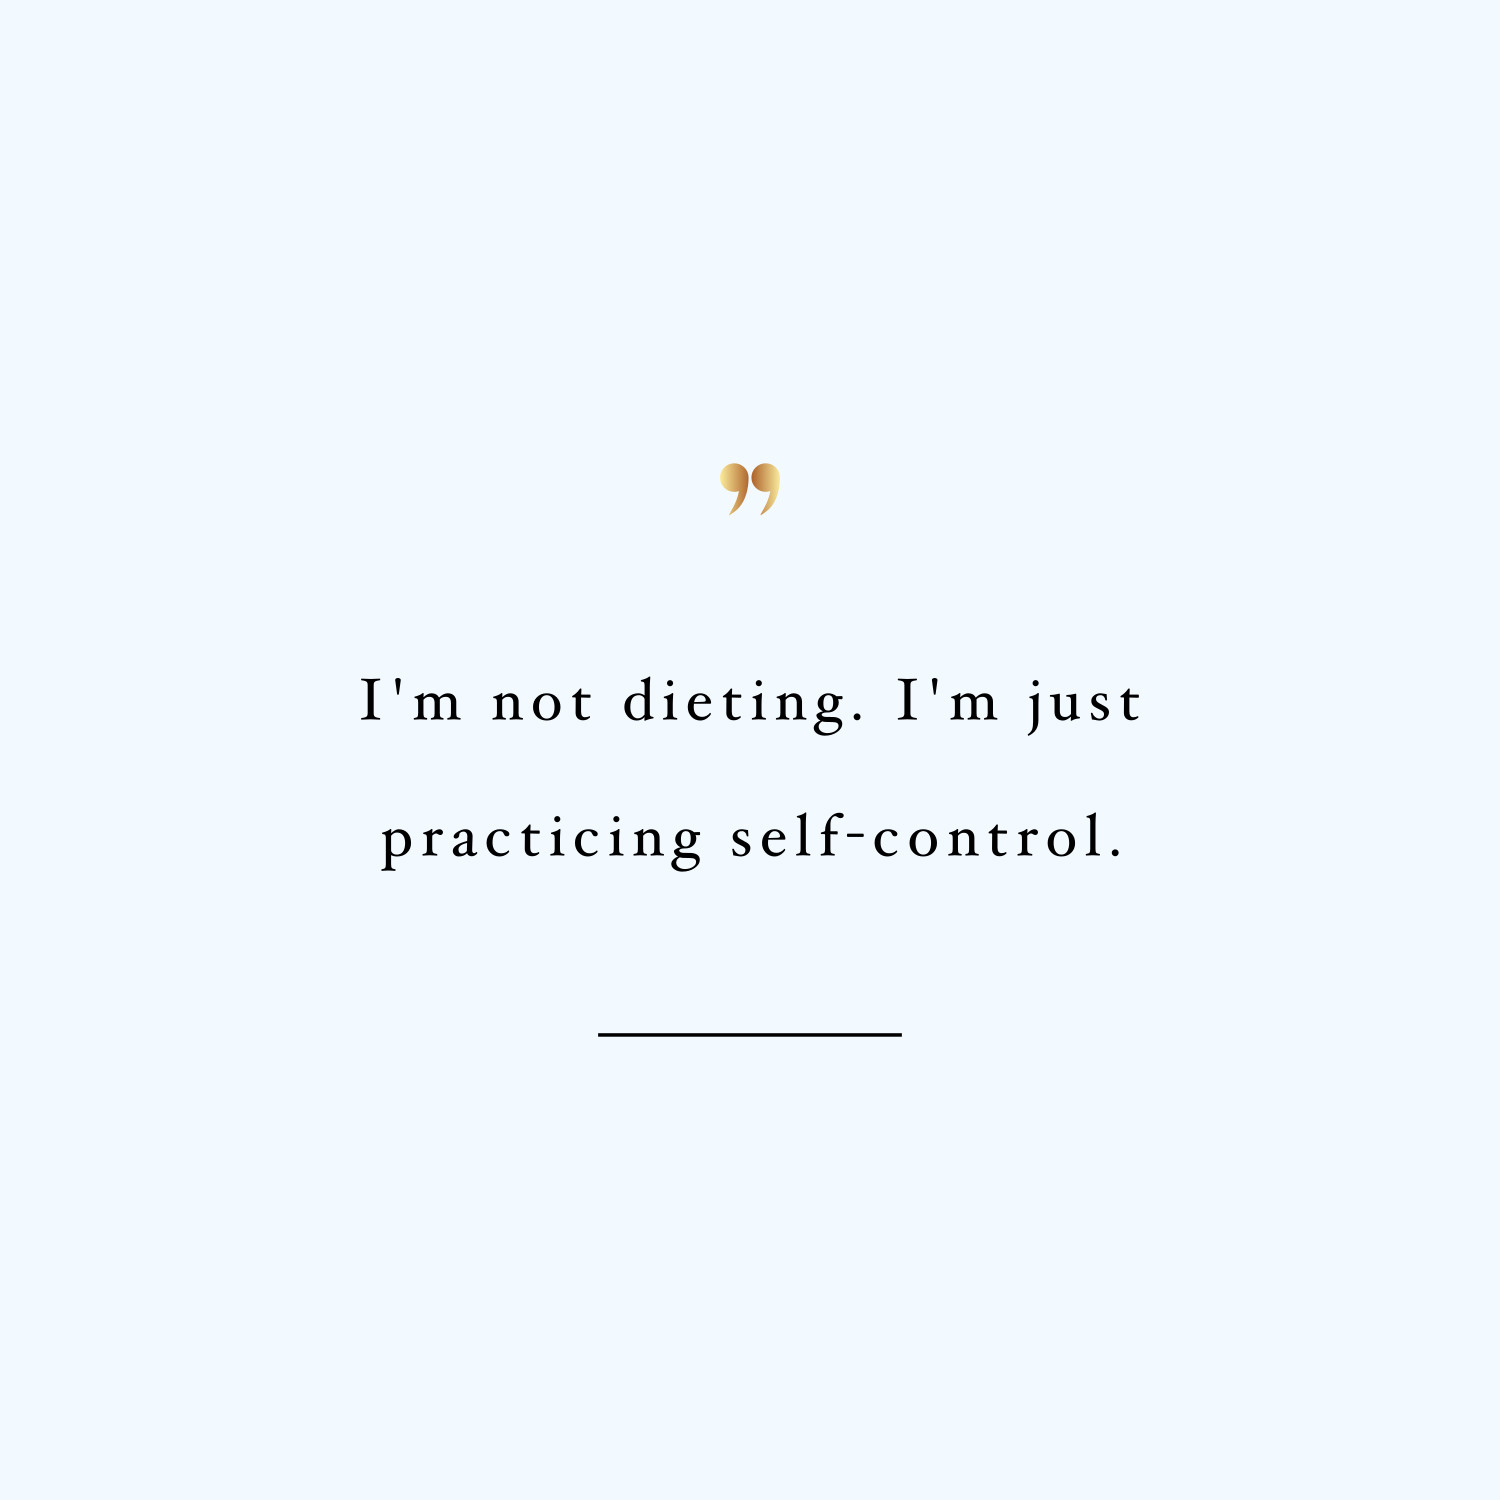 Practice self-control! Browse our collection of motivational fitness and weight loss quotes and get instant exercise and healthy eating inspiration. Transform positive thoughts into positive actions and get fit, healthy and happy! https://www.spotebi.com/workout-motivation/practice-self-control/